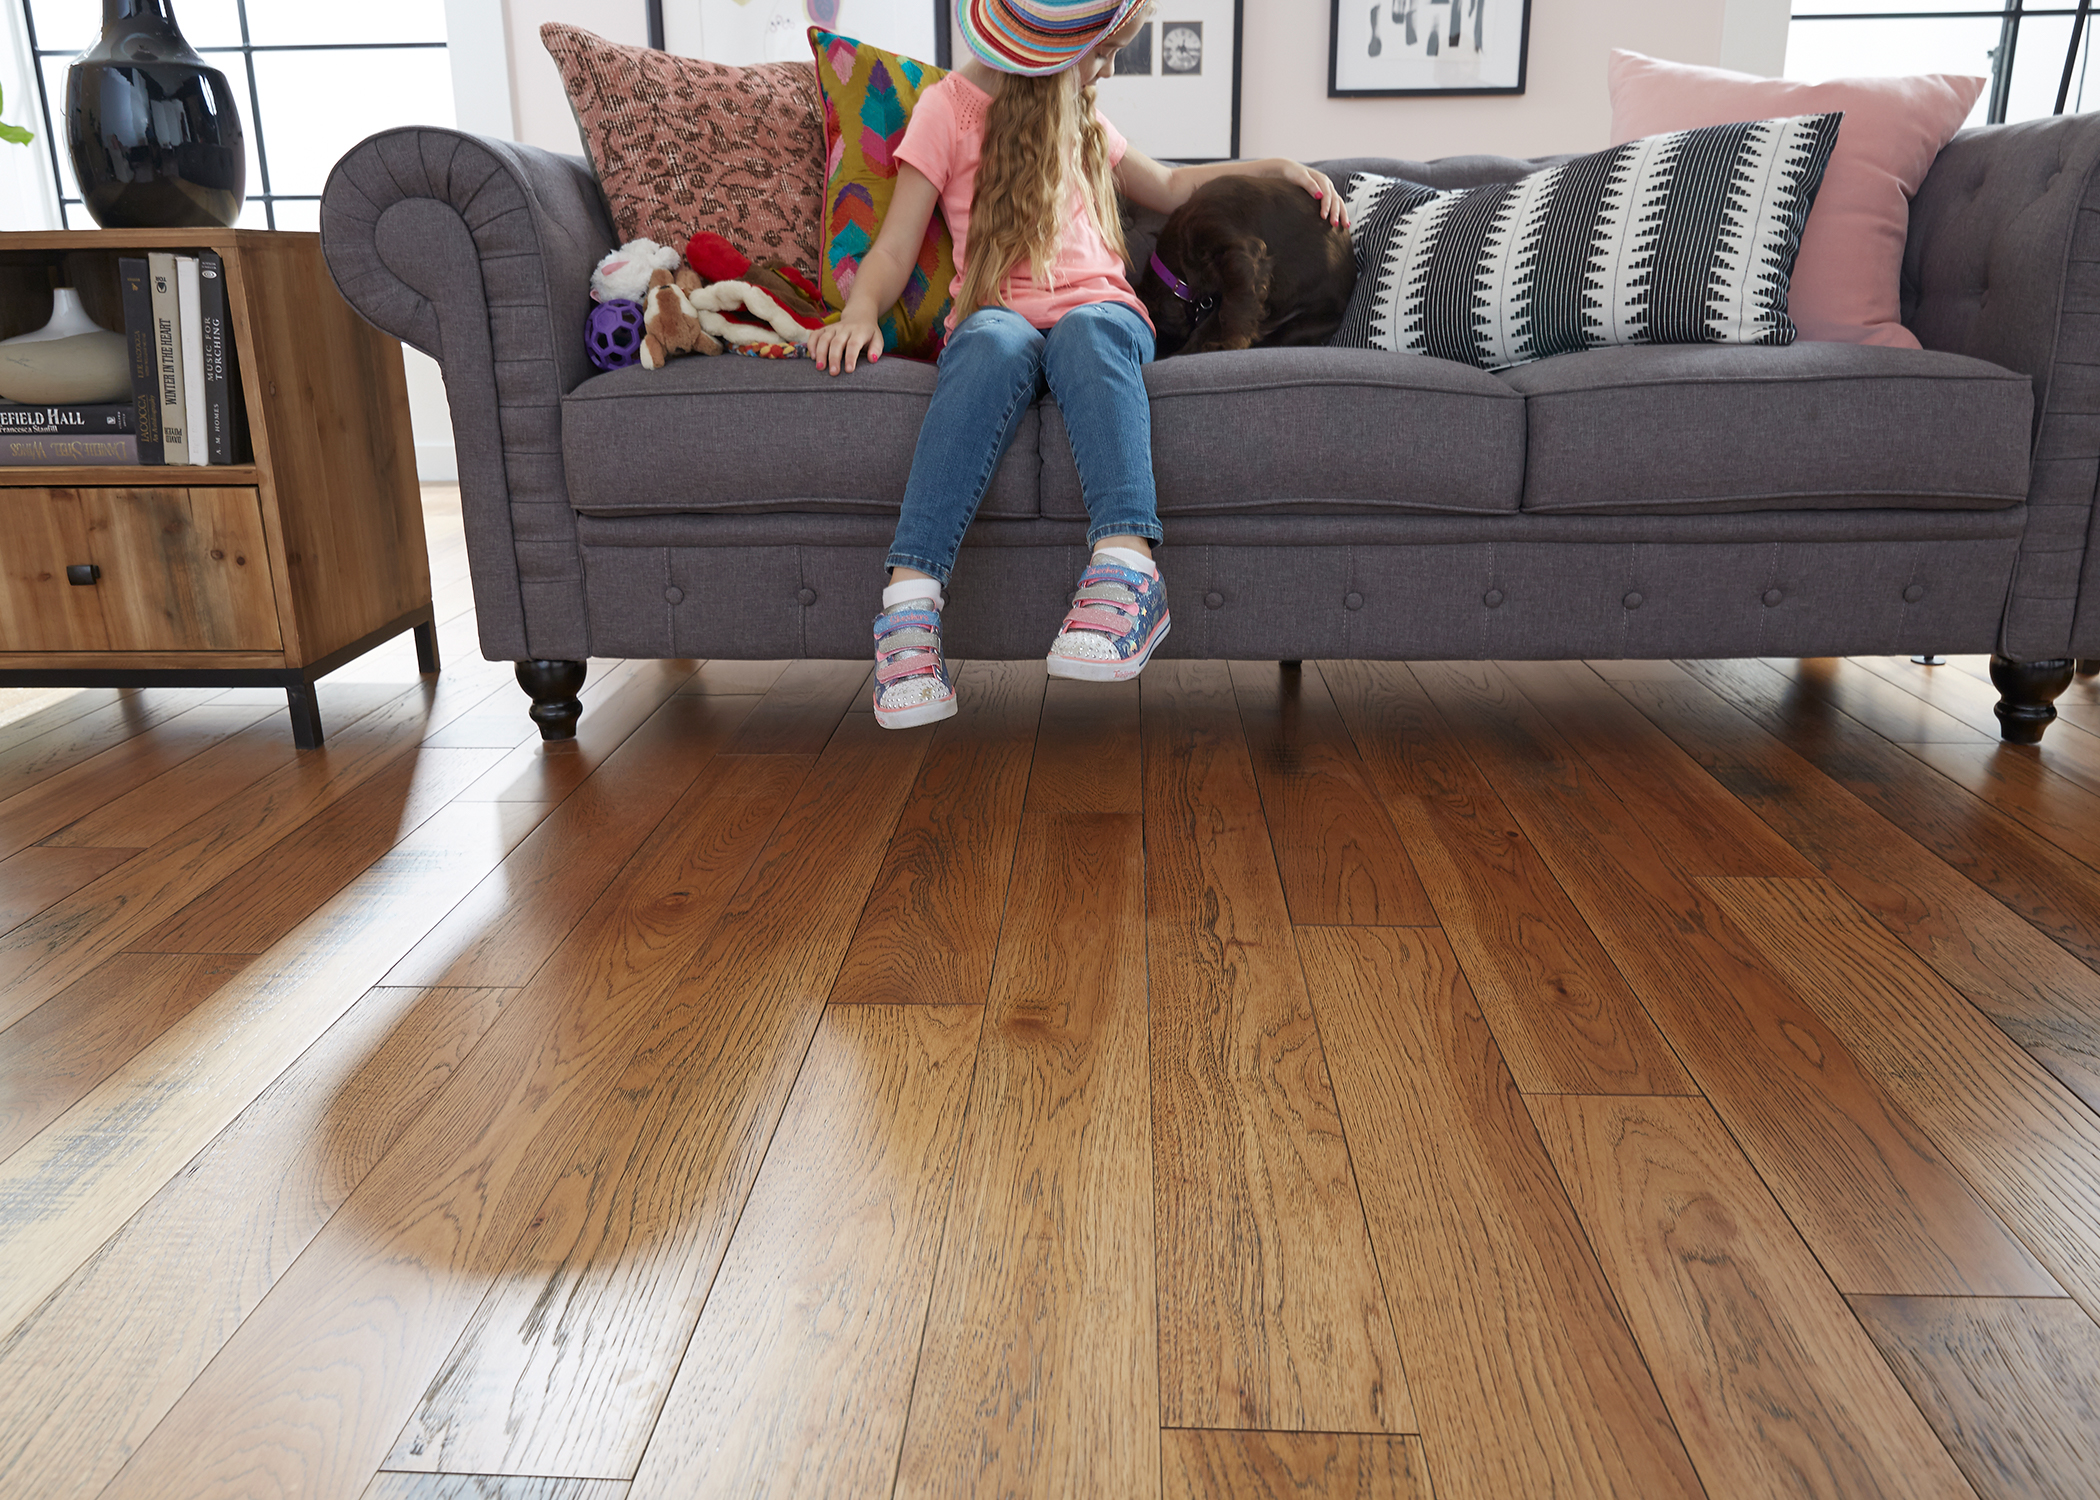 medium brown solid hardwood floor in living room with young child and dog sitting on gray sofa with pink and black accent pillows